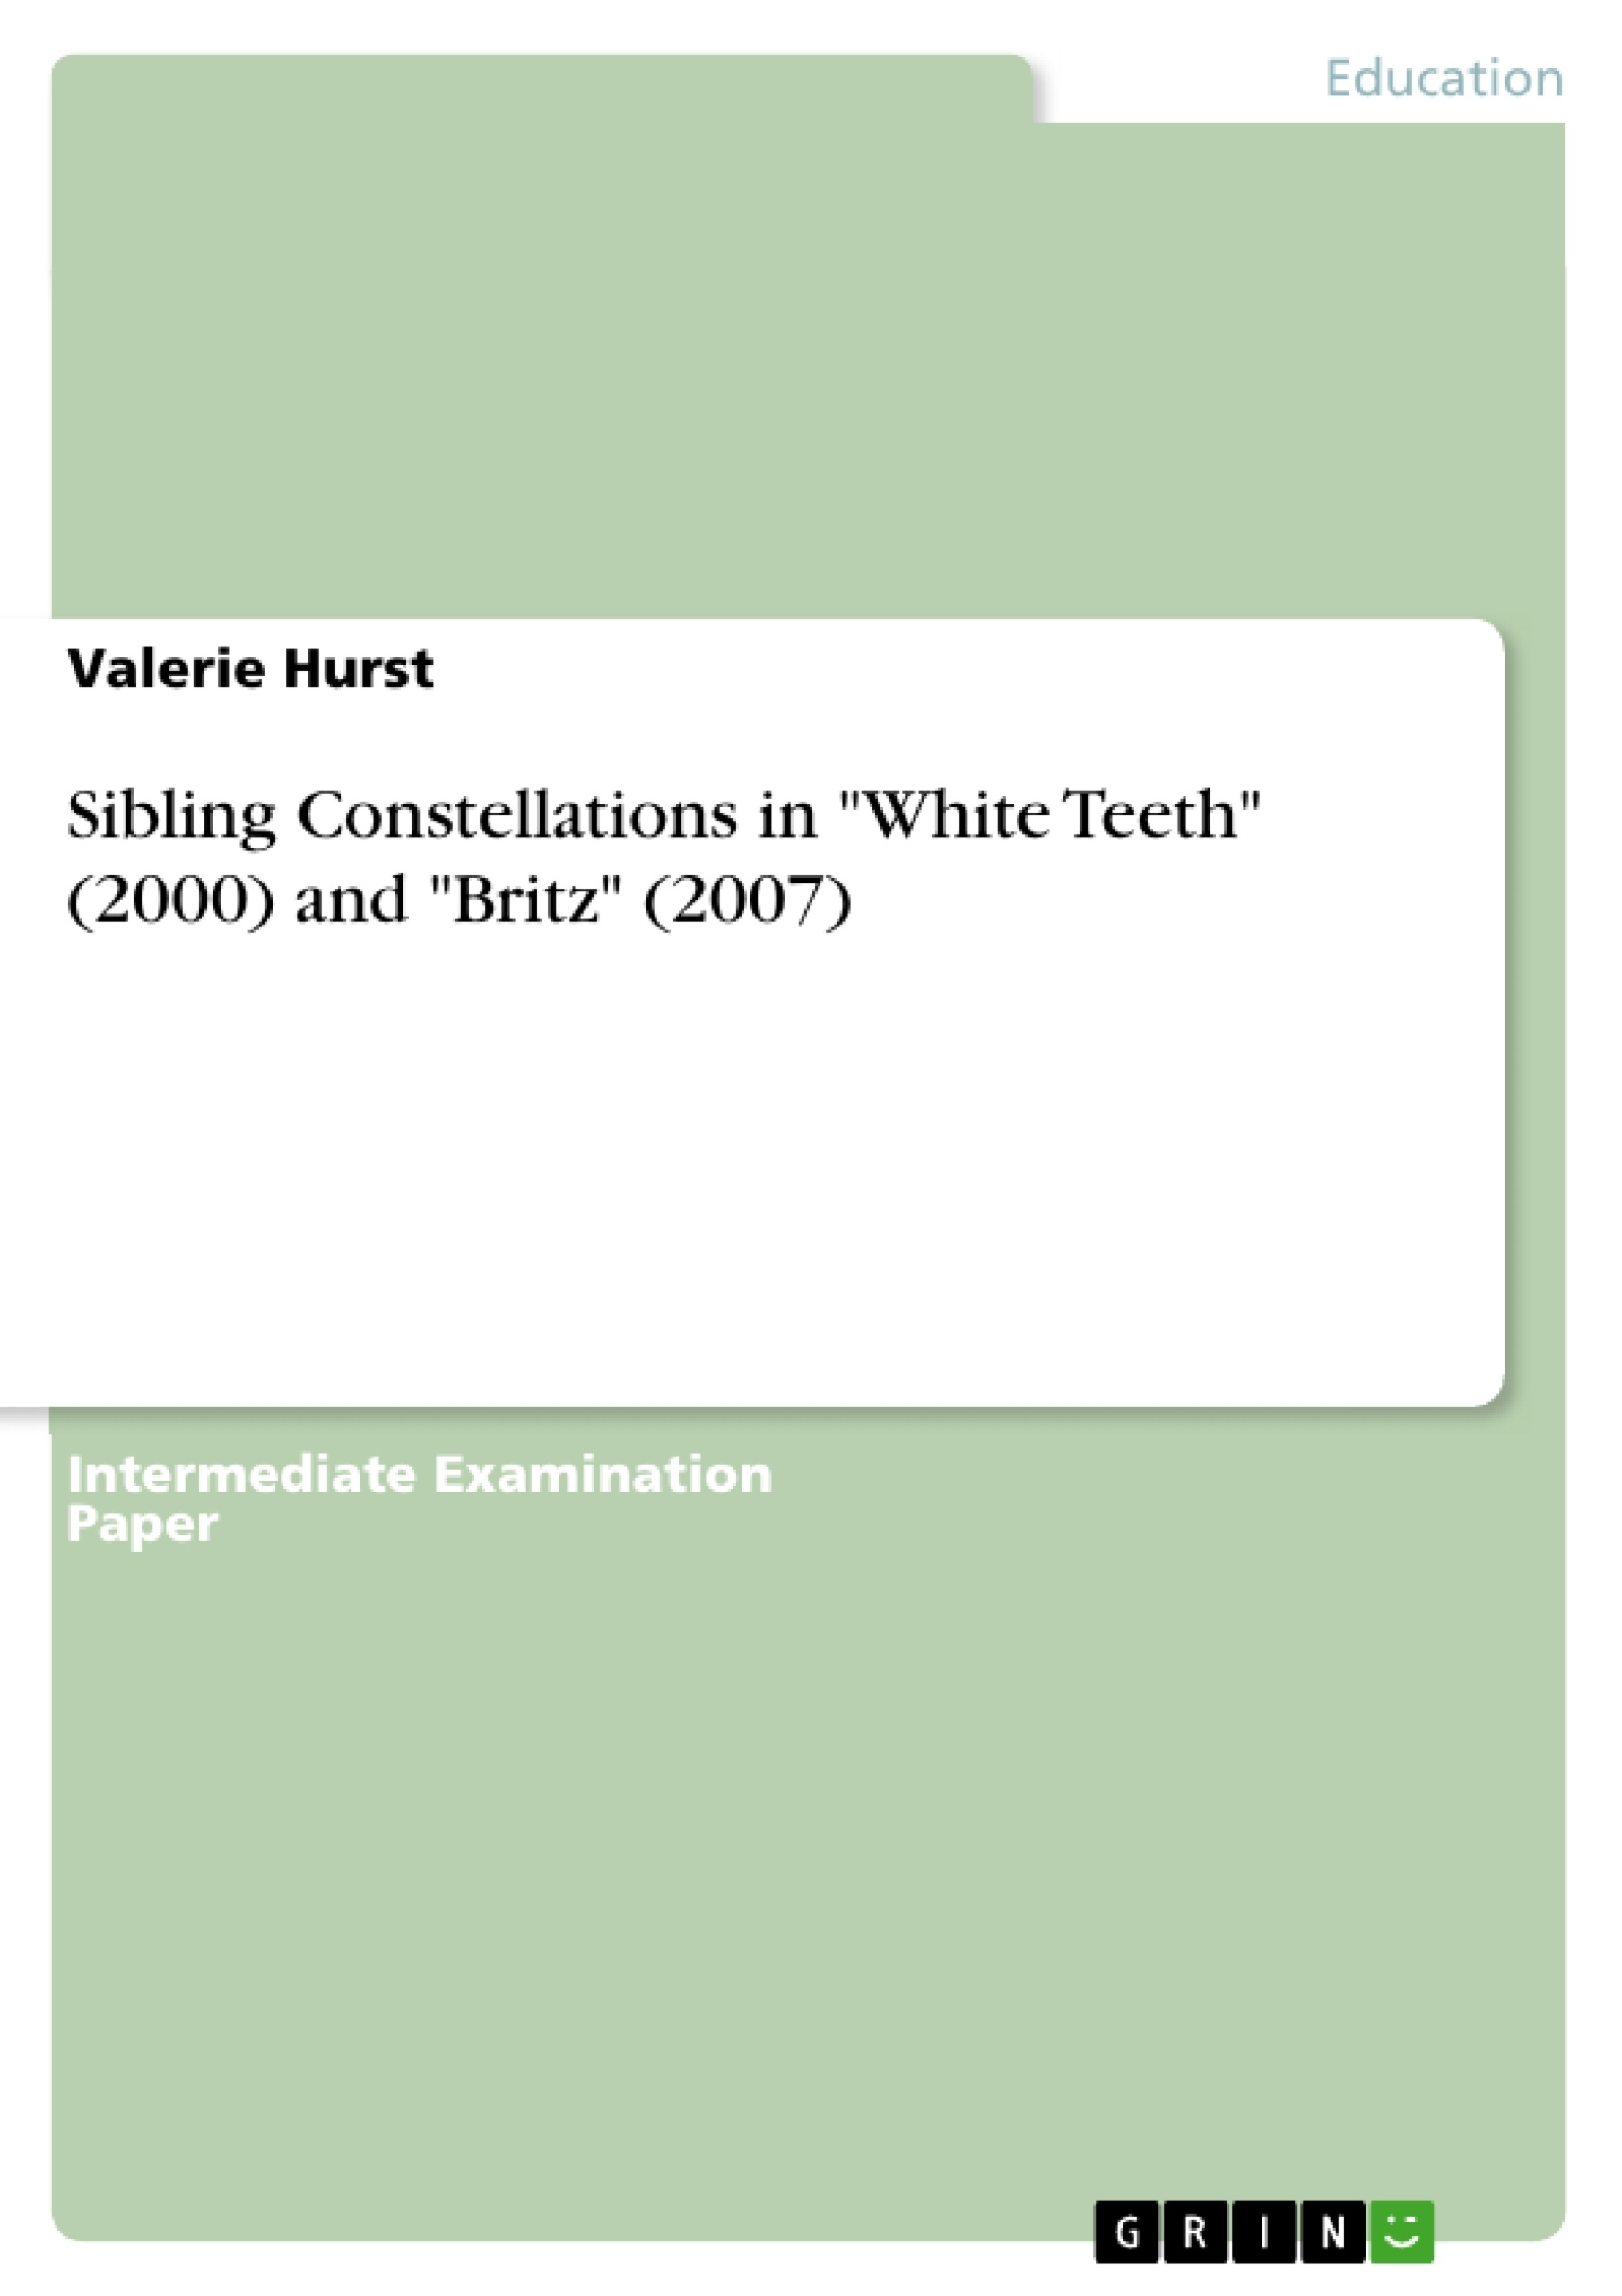 Titre: Sibling Constellations in "White Teeth" (2000) and "Britz" (2007)